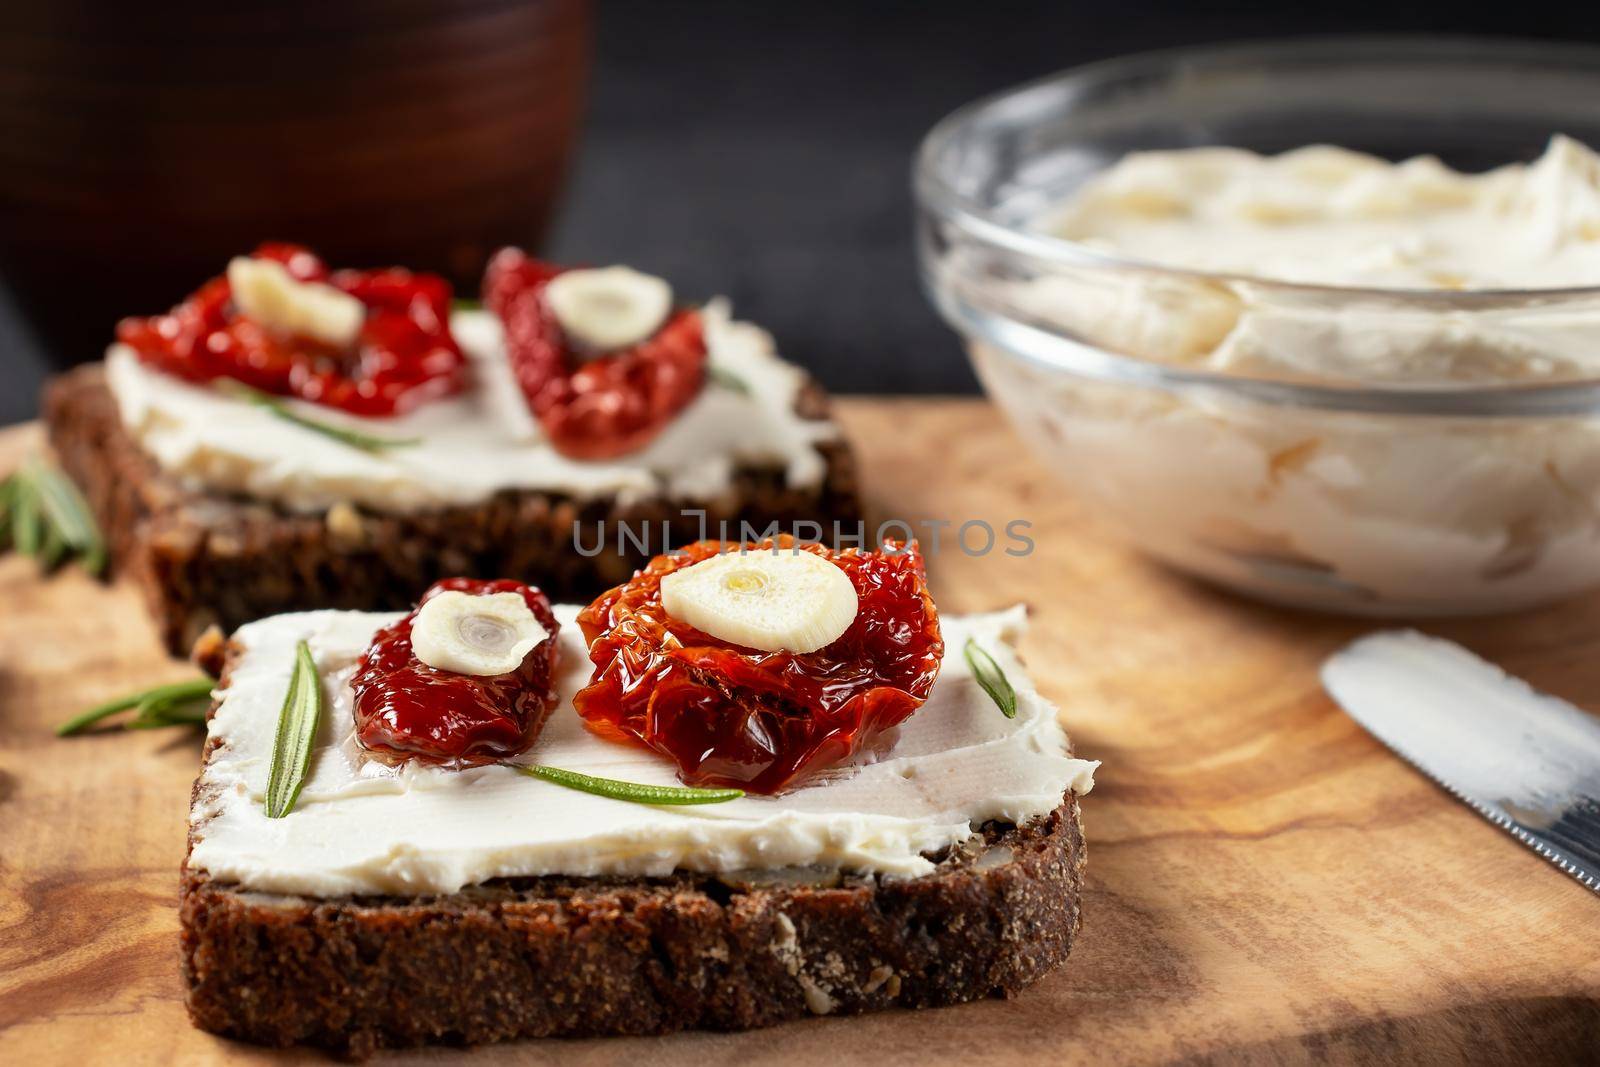 Homemade multigrain bread sandwiches with cream cheese and sun-dried tomatoes on a wooden platter, close-up. Healthy eating concept by galsand